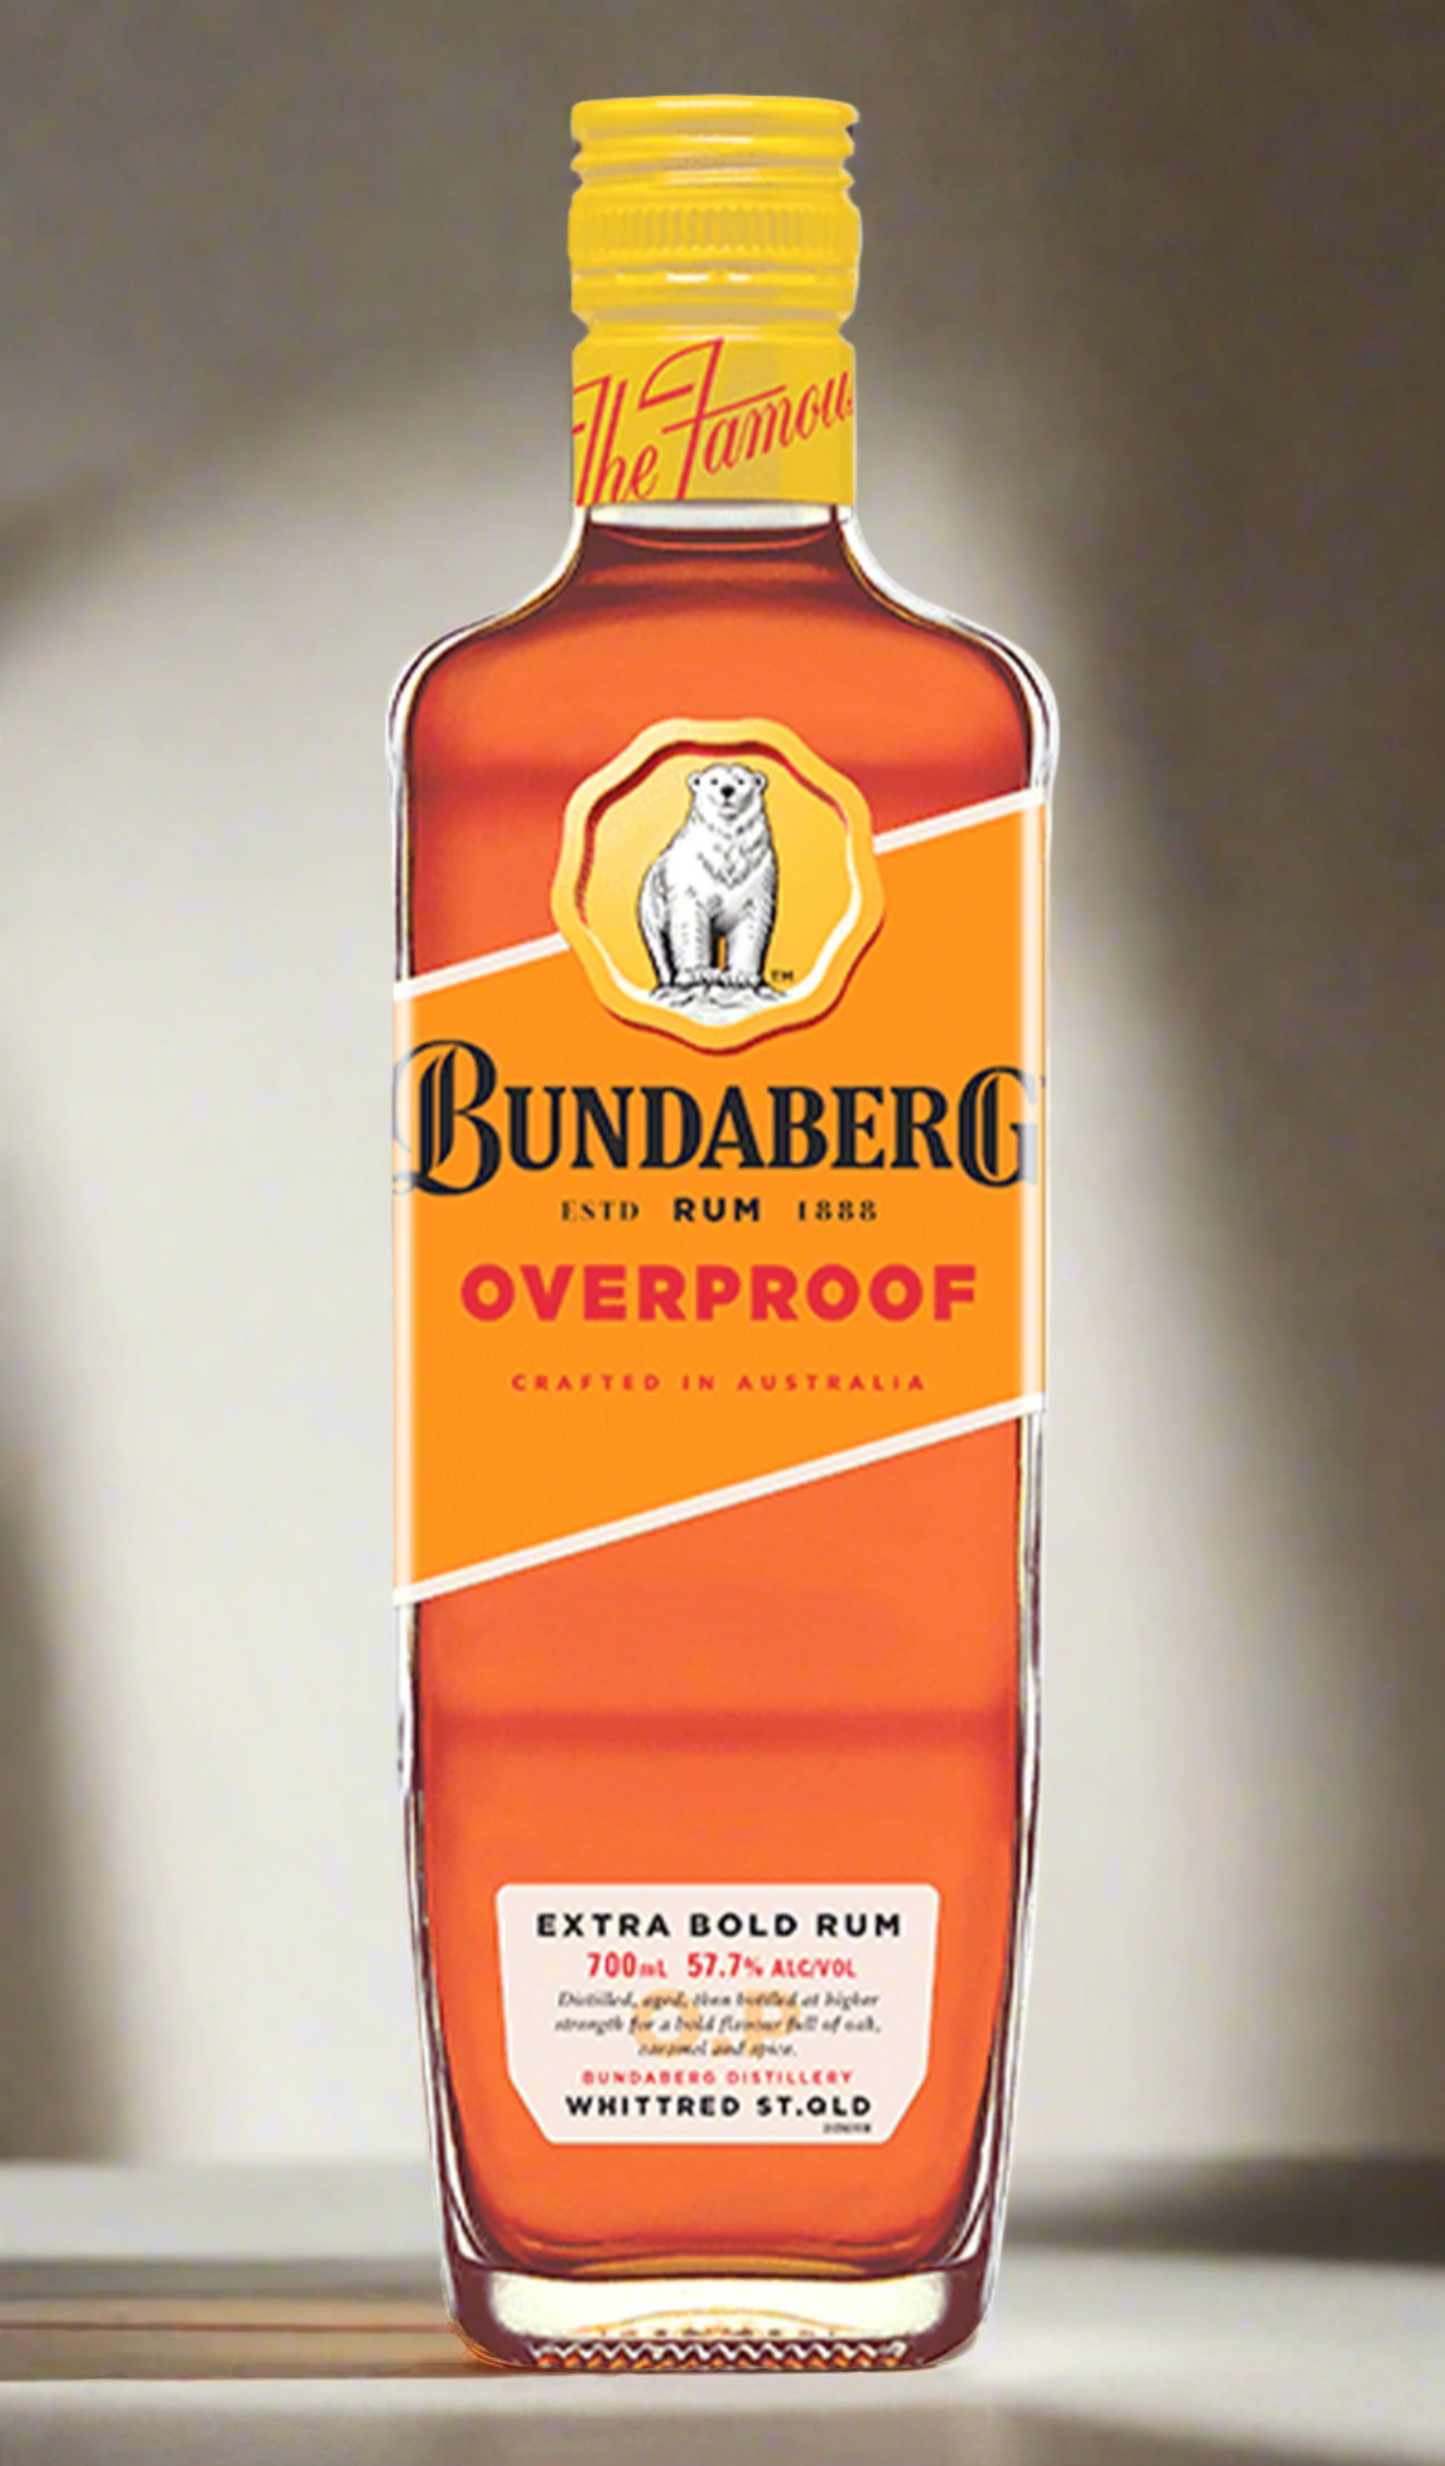 Find out more or buy Bundaberg Rum Overproof 57.7% online at Wine Sellers Direct - Australia’s independent liquor specialists.